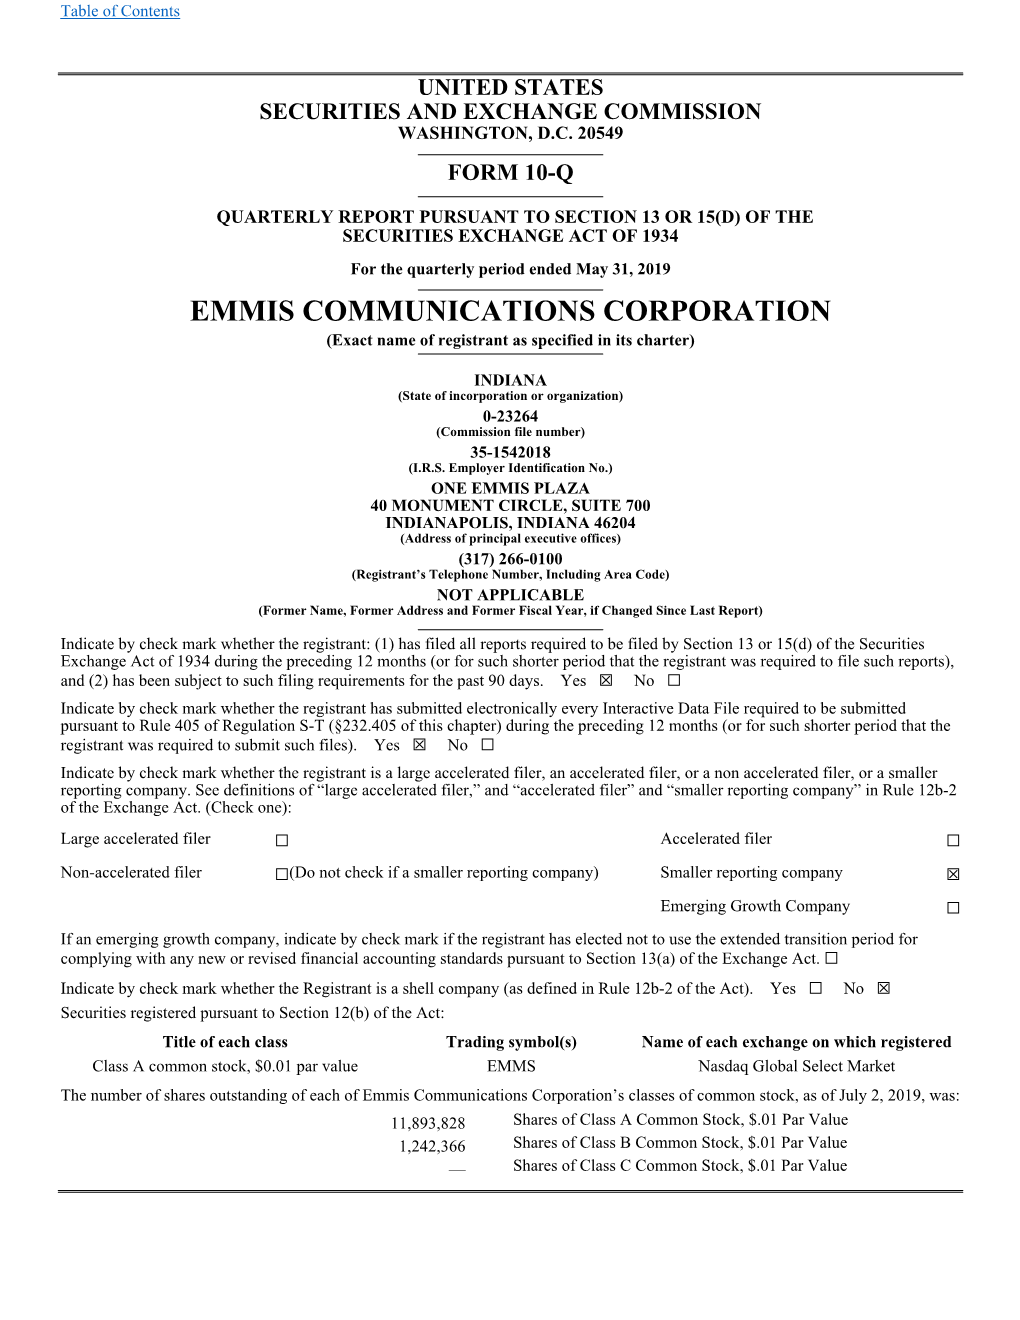 EMMIS COMMUNICATIONS CORPORATION (Exact Name of Registrant As Specified in Its Charter)